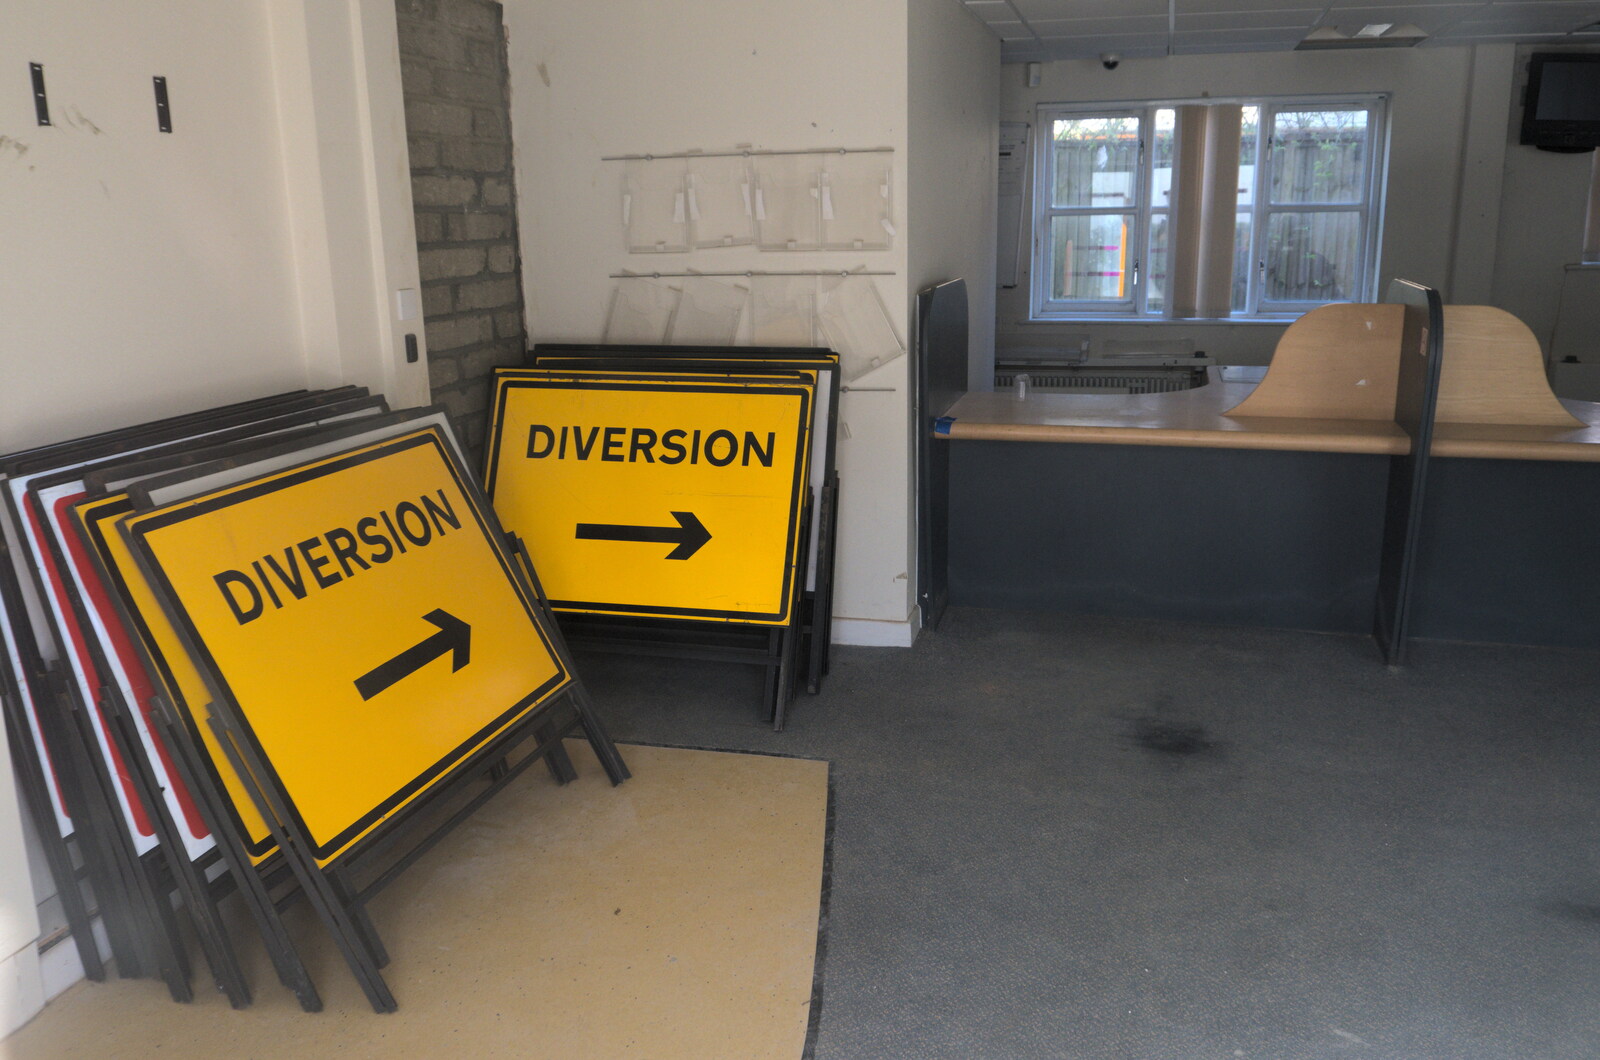 Road signs in the old council offices in Eye from Life Before Lockdown: A March Miscellany - 22nd March 2020